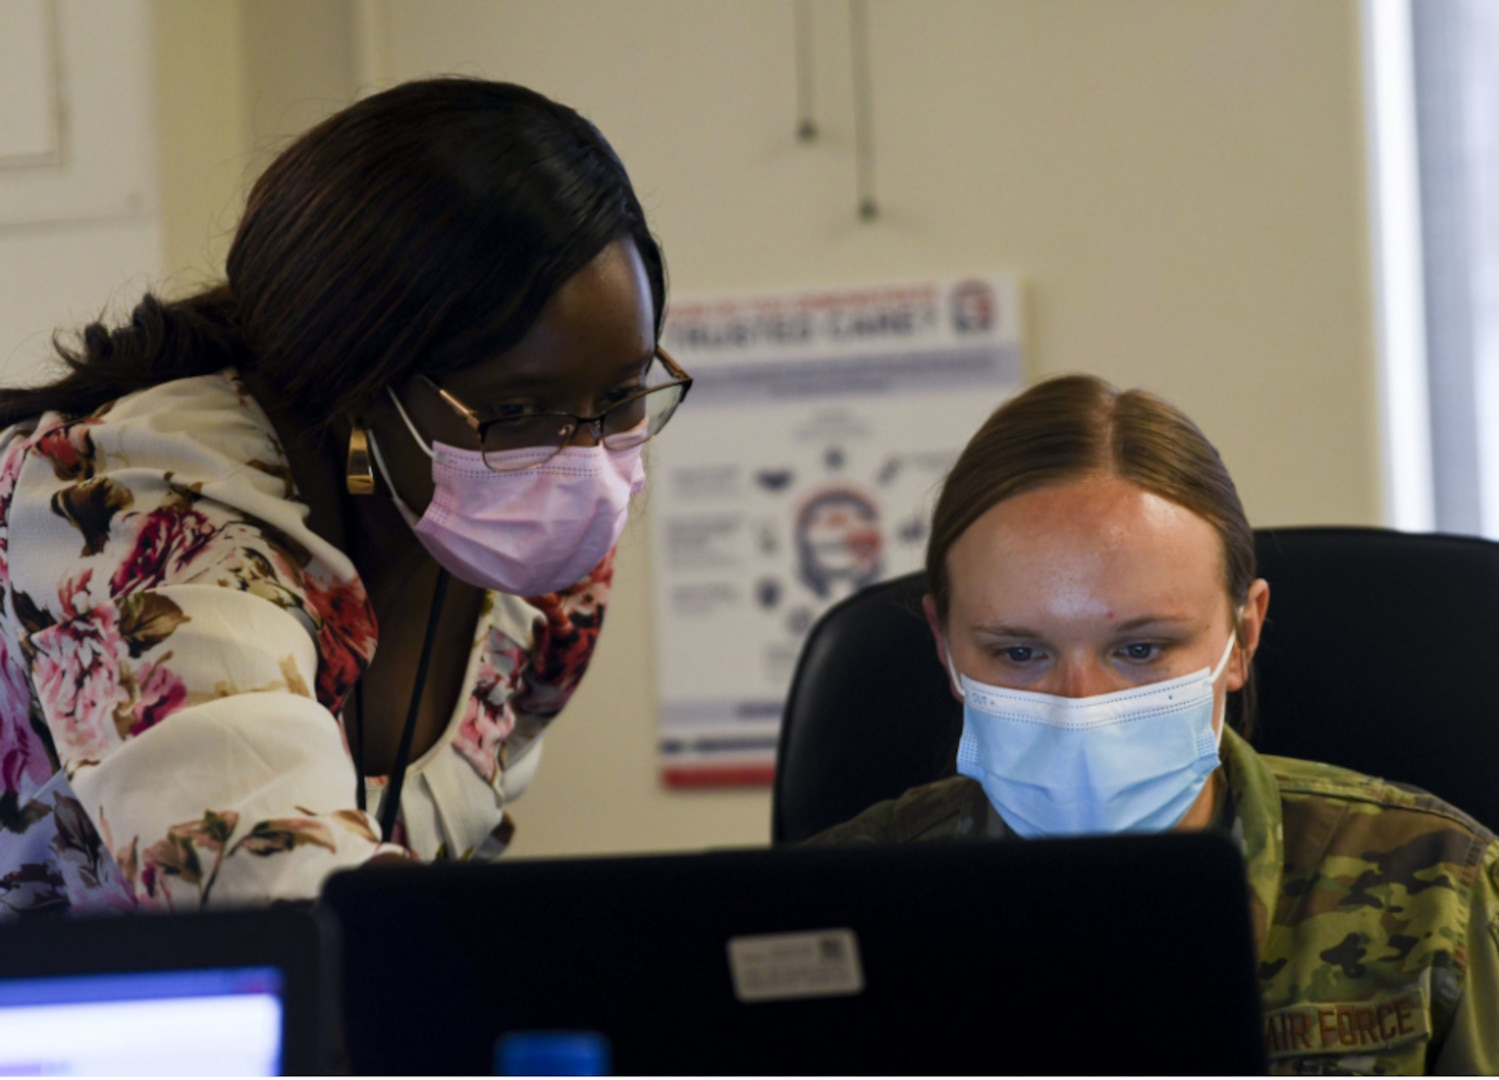 Marion Kimani, Military Health System GENESIS trainer, gives instruction to Airman 1st Class Jenna Slaughter, 355th Mental Health technician, at Davis-Monthan Air Force Base, Arizona, April 7, 2021.